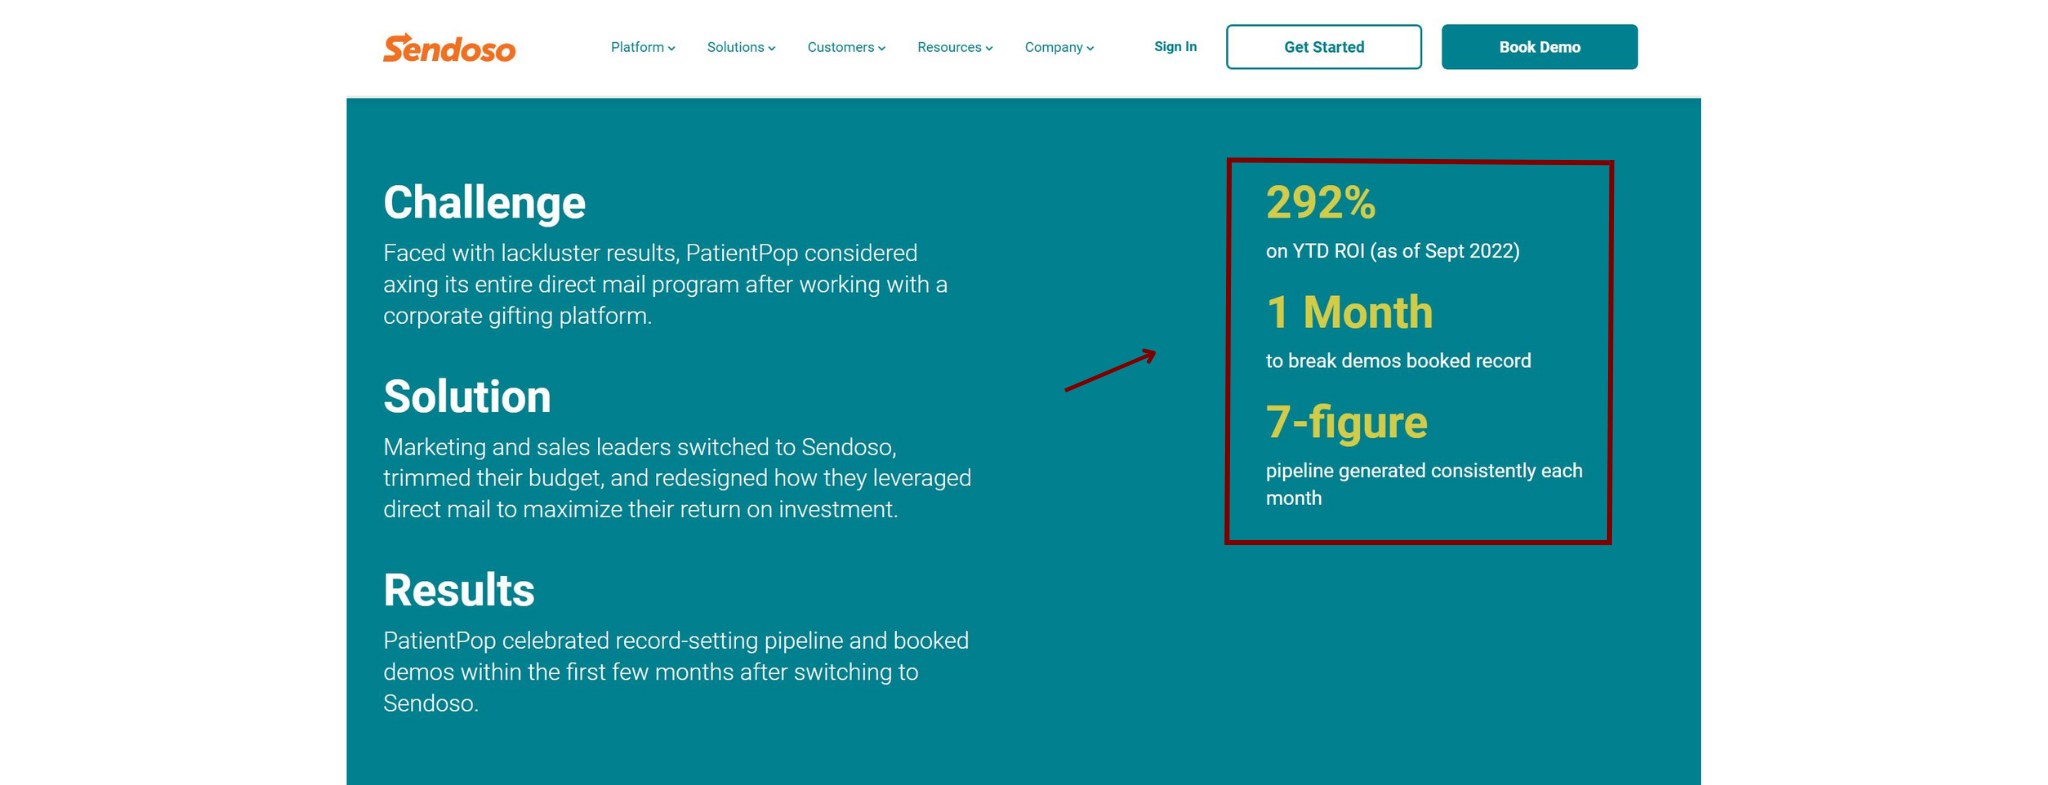 A screen capture for a Sendoso case study represents how to make a big statement with minimal text.